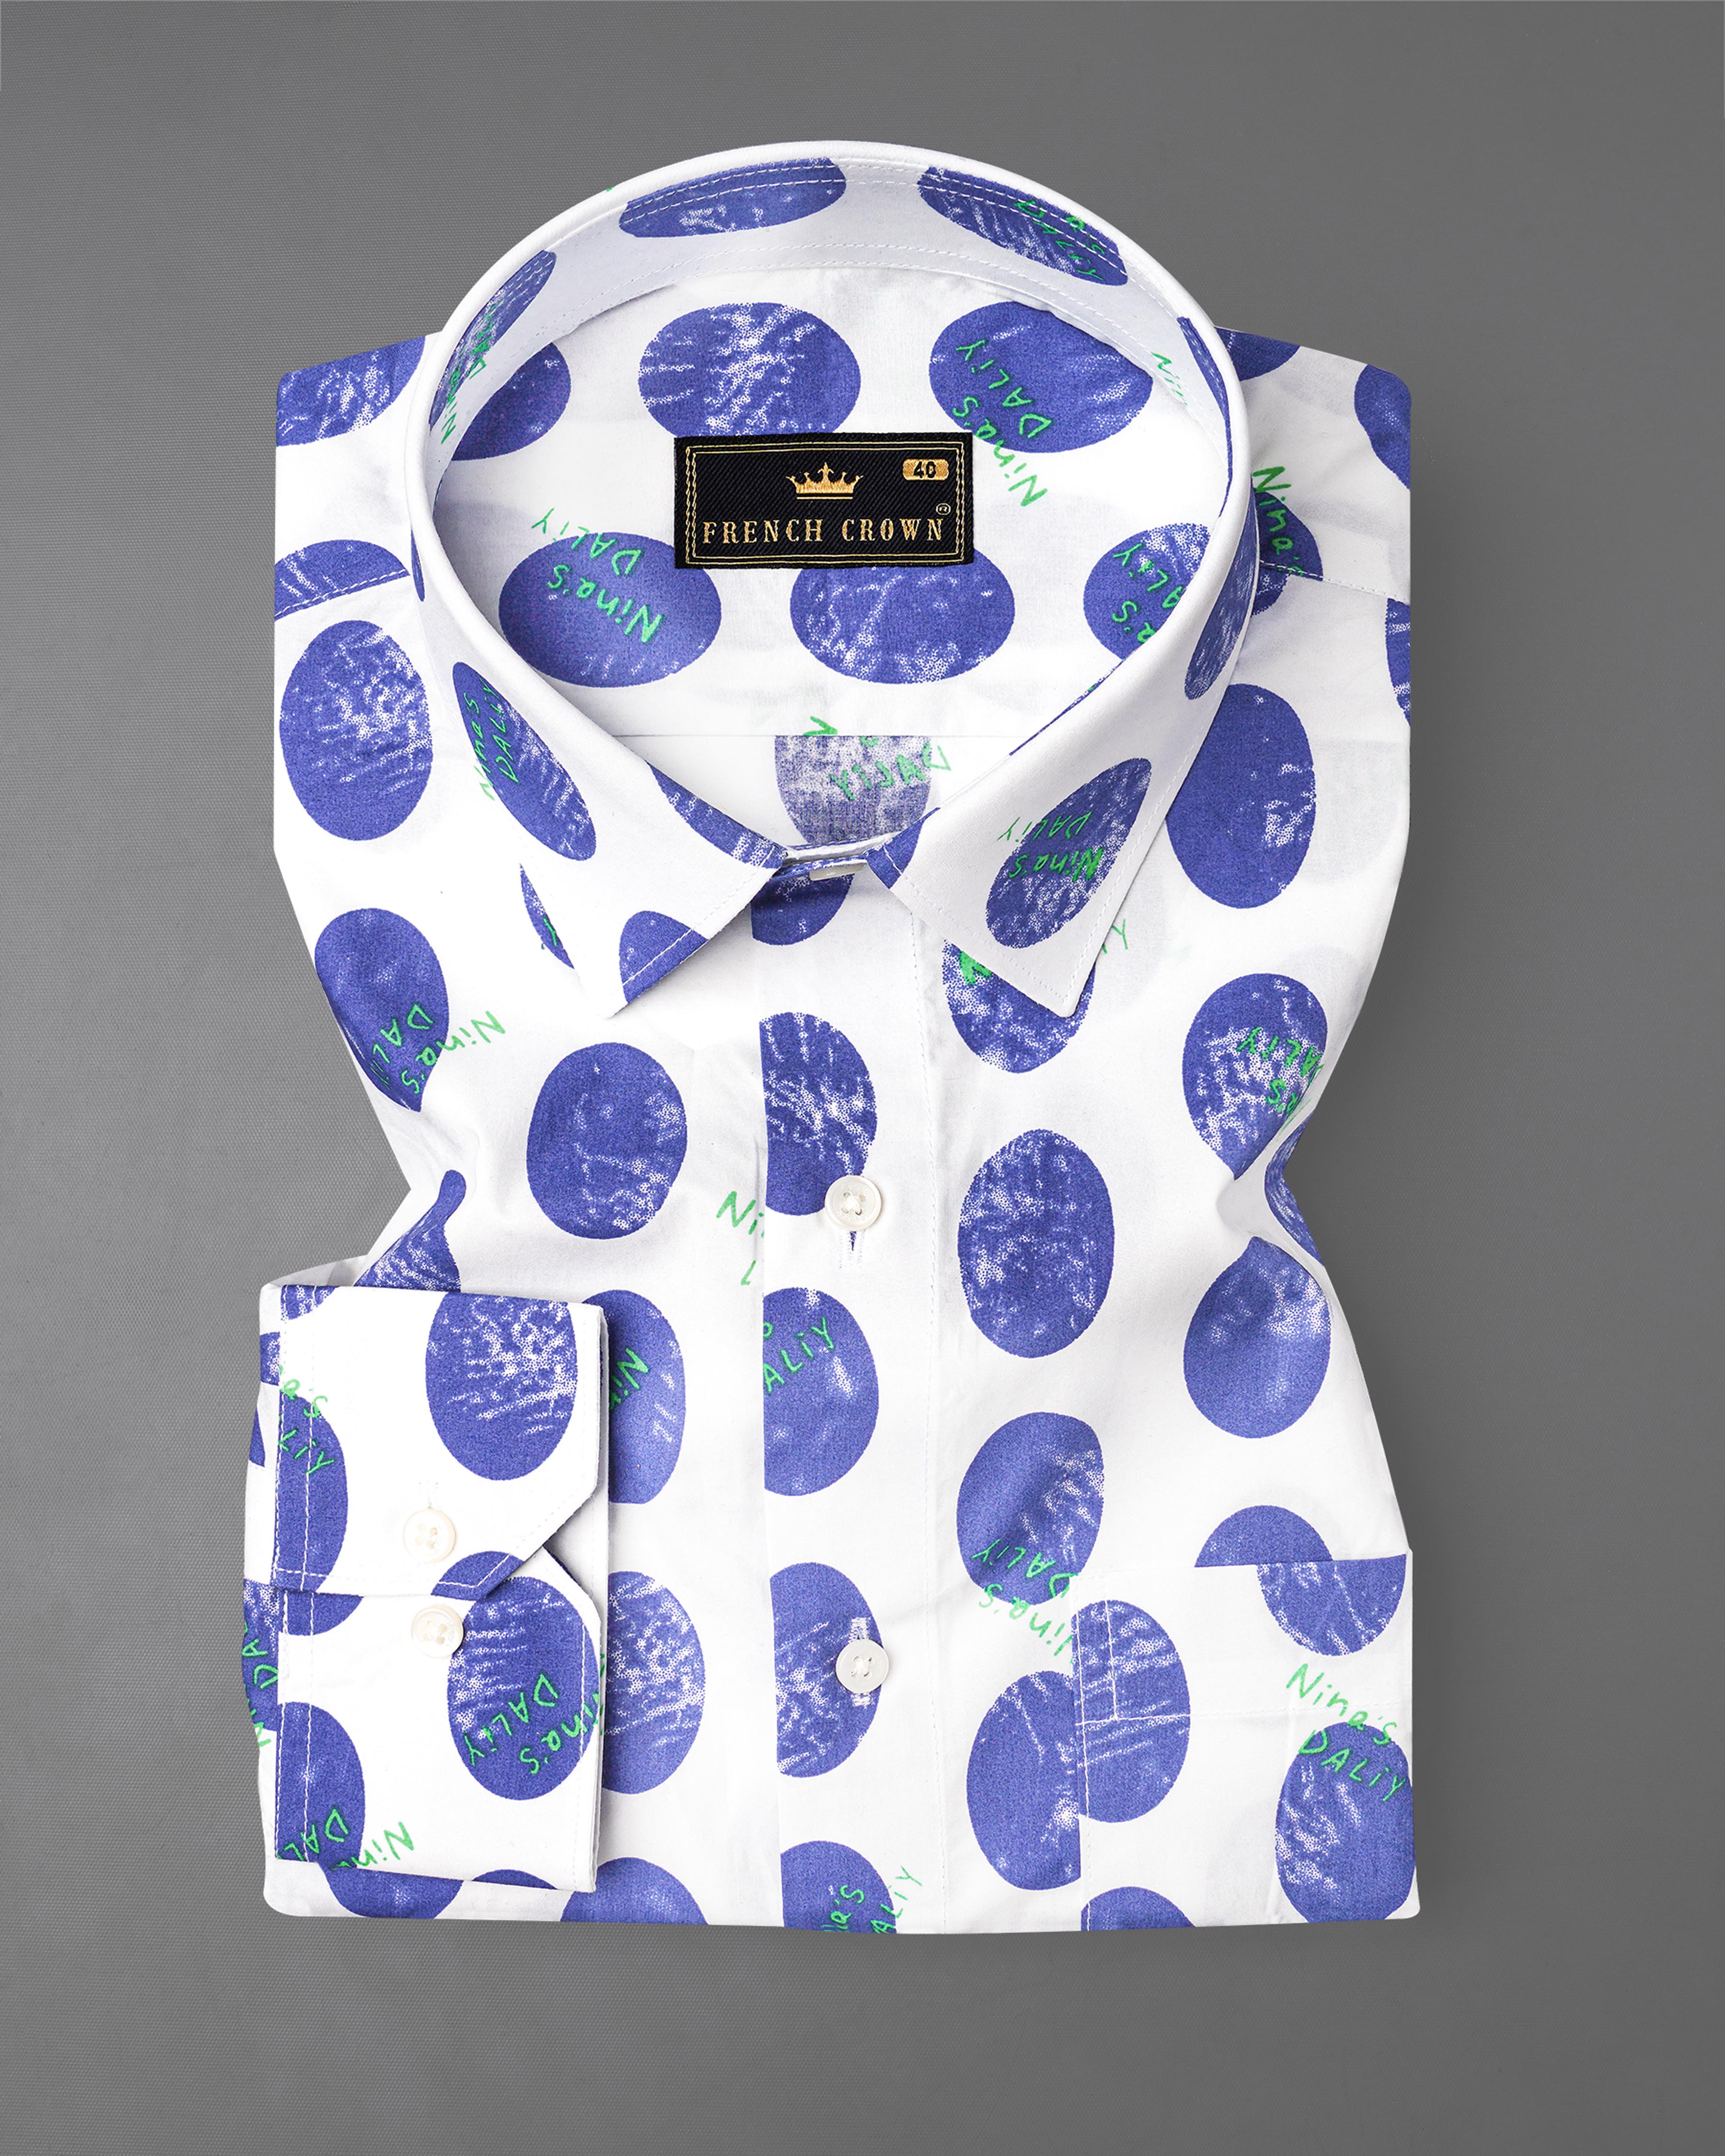 Bright White with Scampi Blue Polka Dotted Premium Cotton Shirt 8123-38, 8123-H-38, 8123-39, 8123-H-39, 8123-40, 8123-H-40, 8123-42, 8123-H-42, 8123-44, 8123-H-44, 8123-46, 8123-H-46, 8123-48, 8123-H-48, 8123-50, 8123-H-50, 8123-52, 8123-H-52